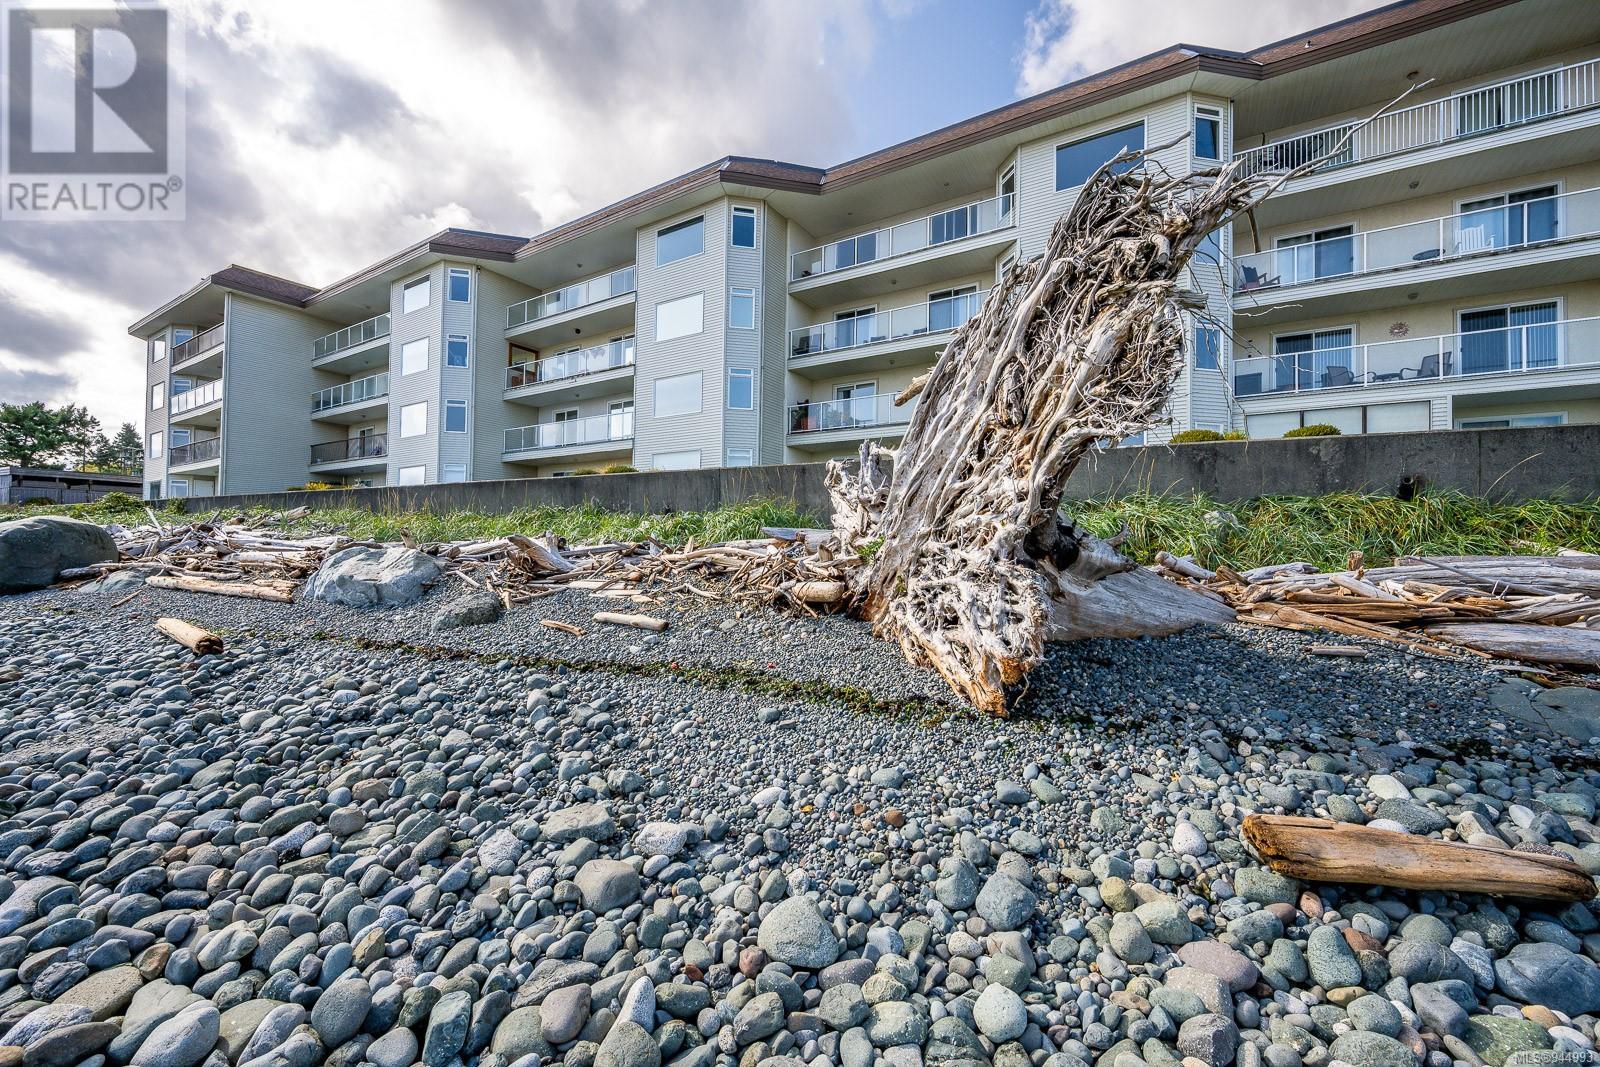 205 169 Island Hwy S, Campbell River